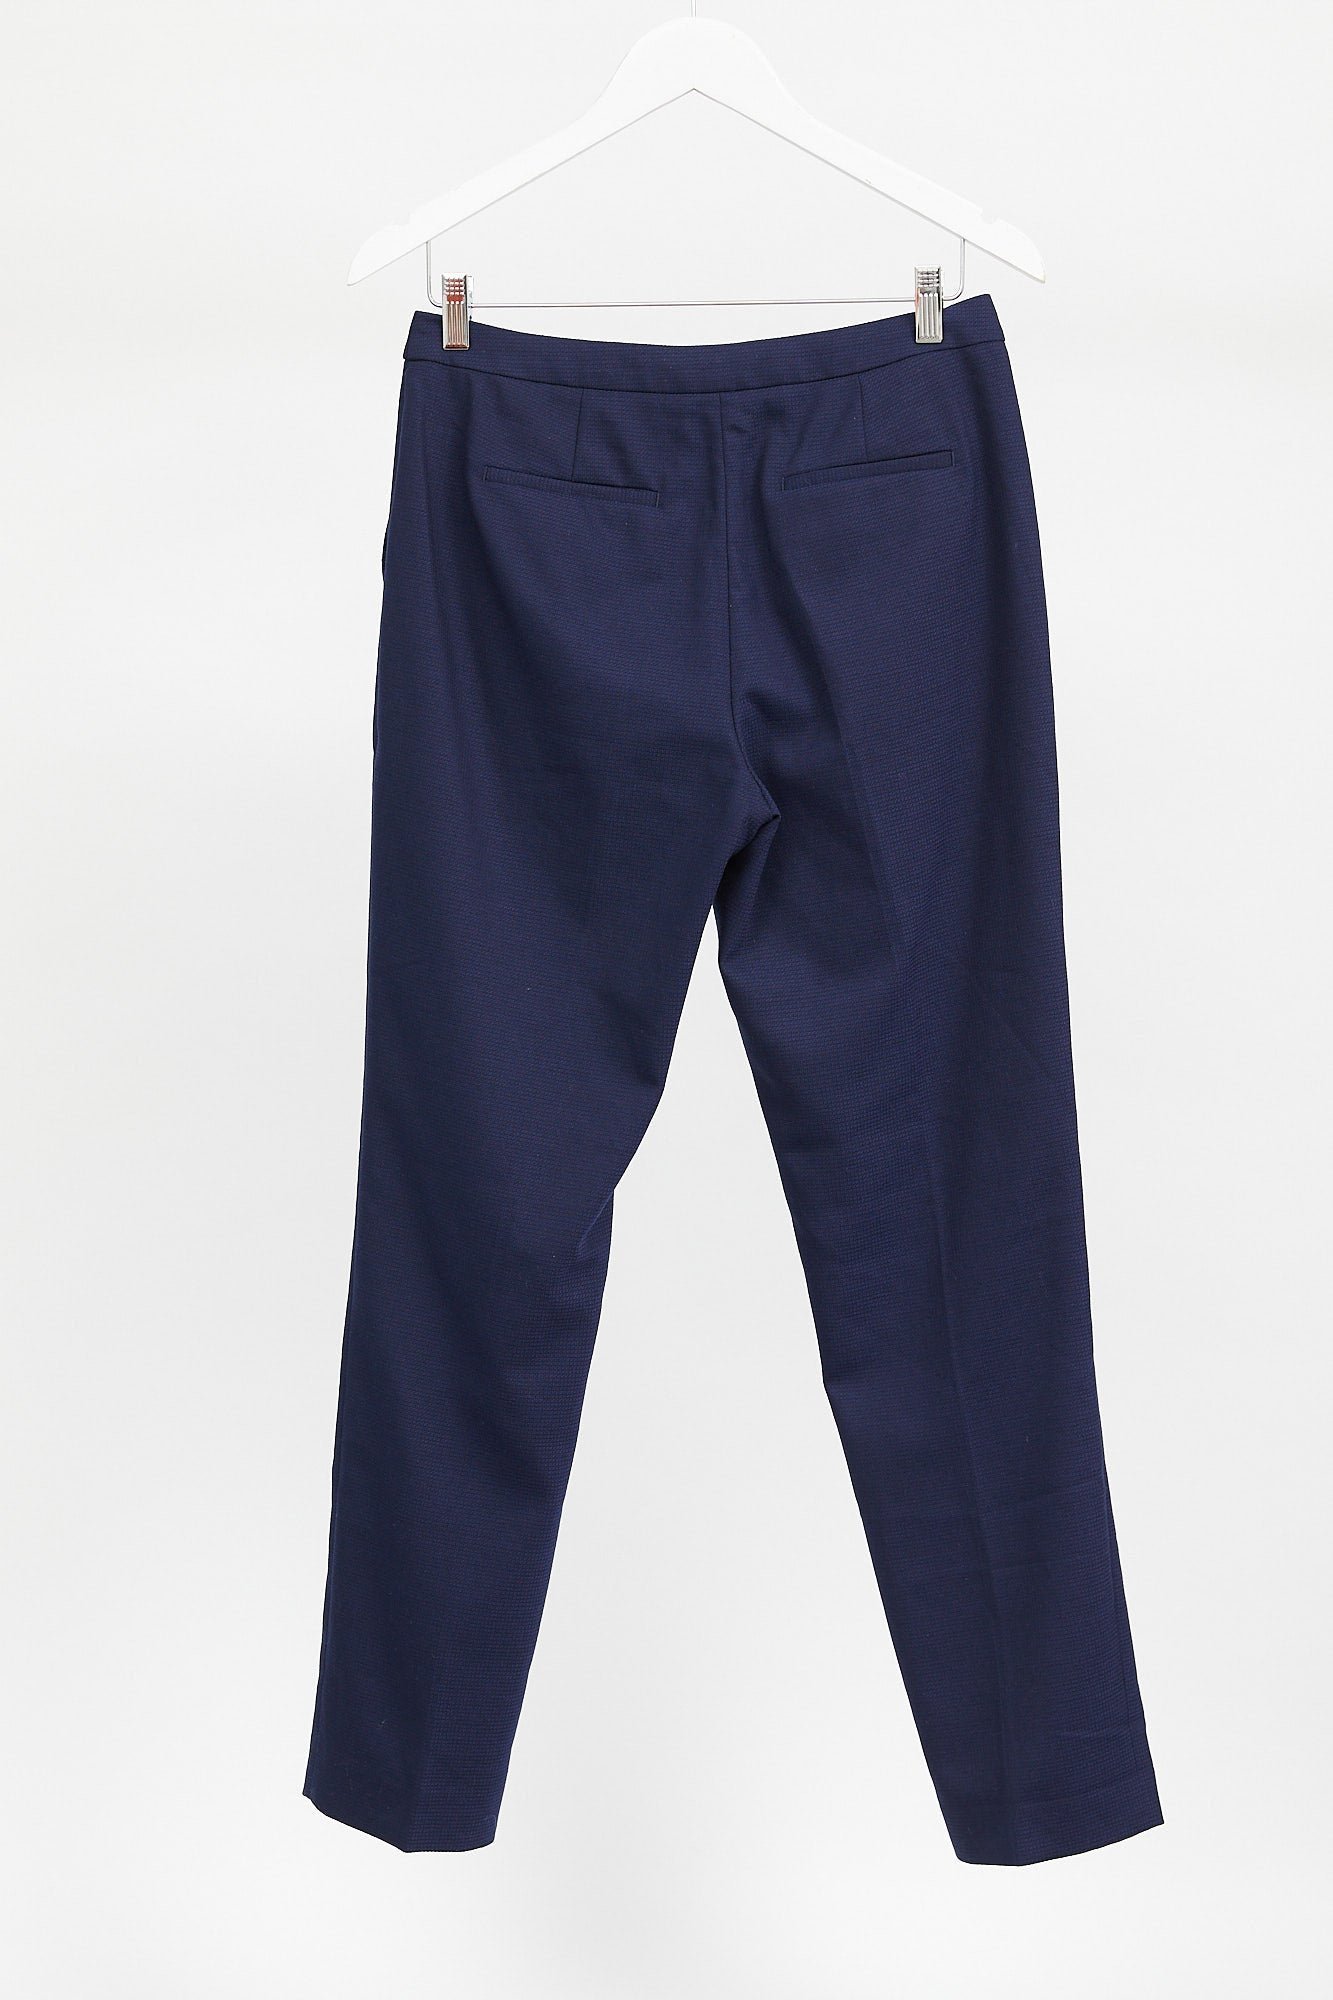 Womens Navy Trousers: Size 10 or Small